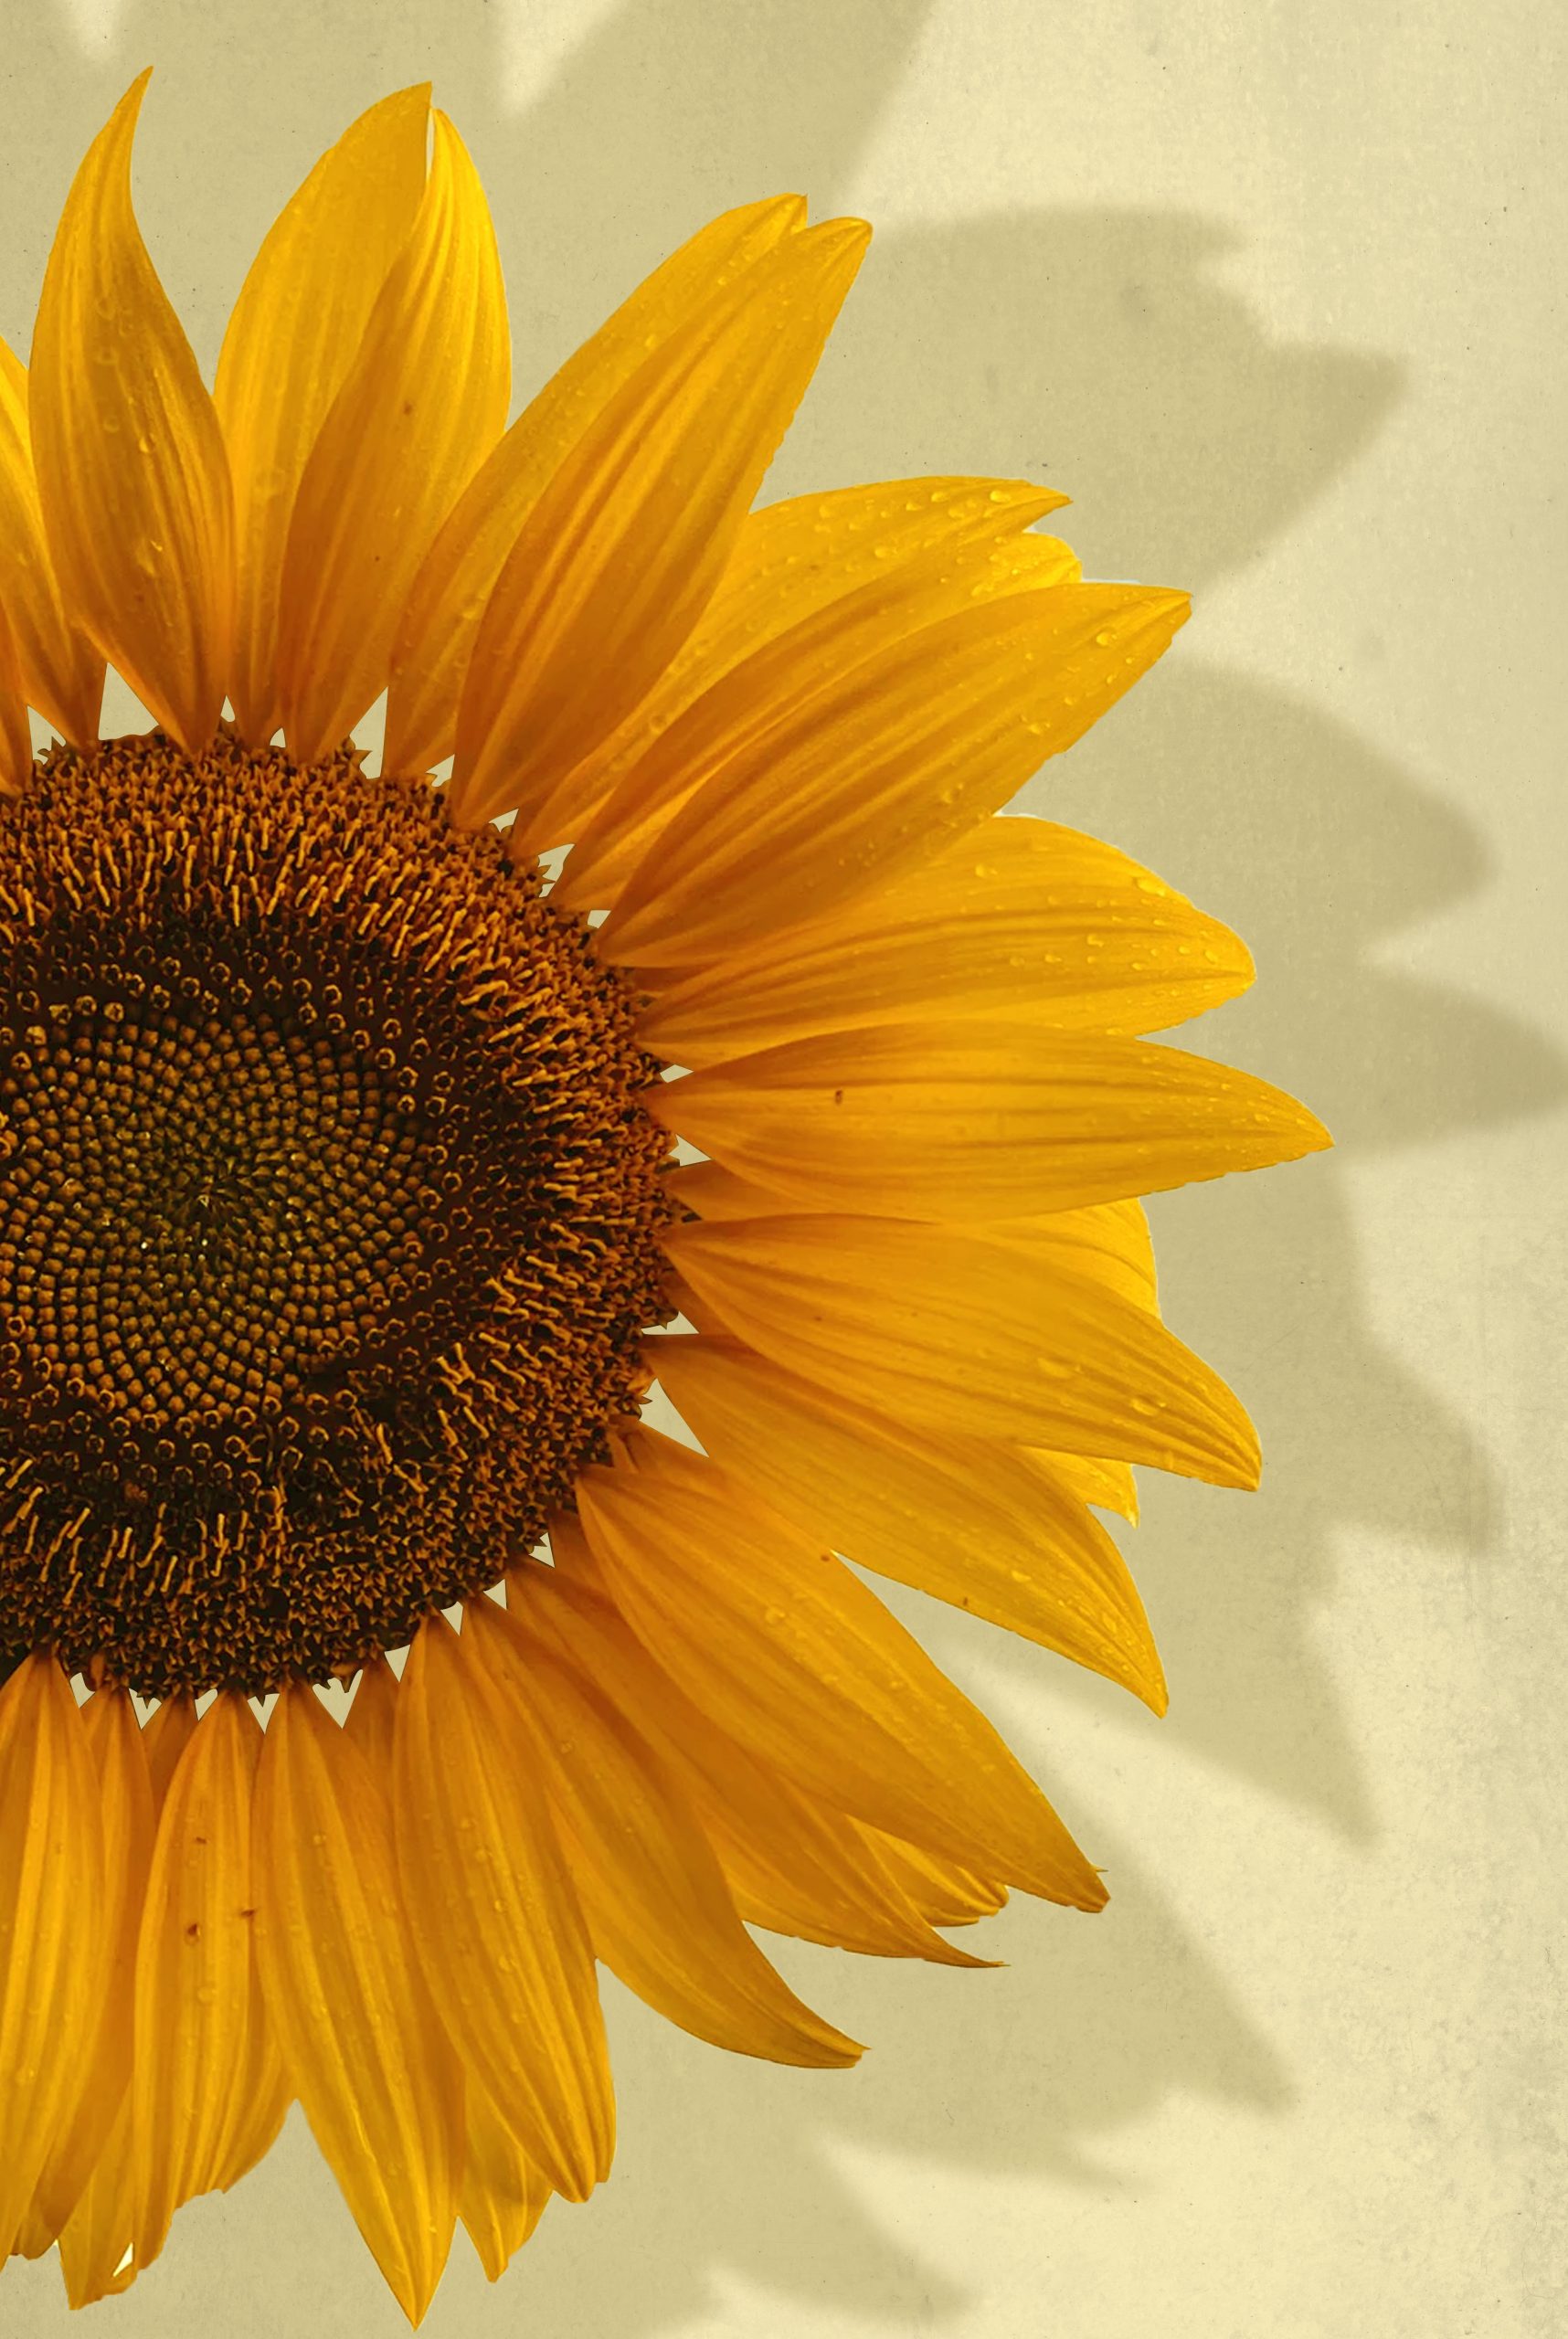 Sunflower in yellow background poster